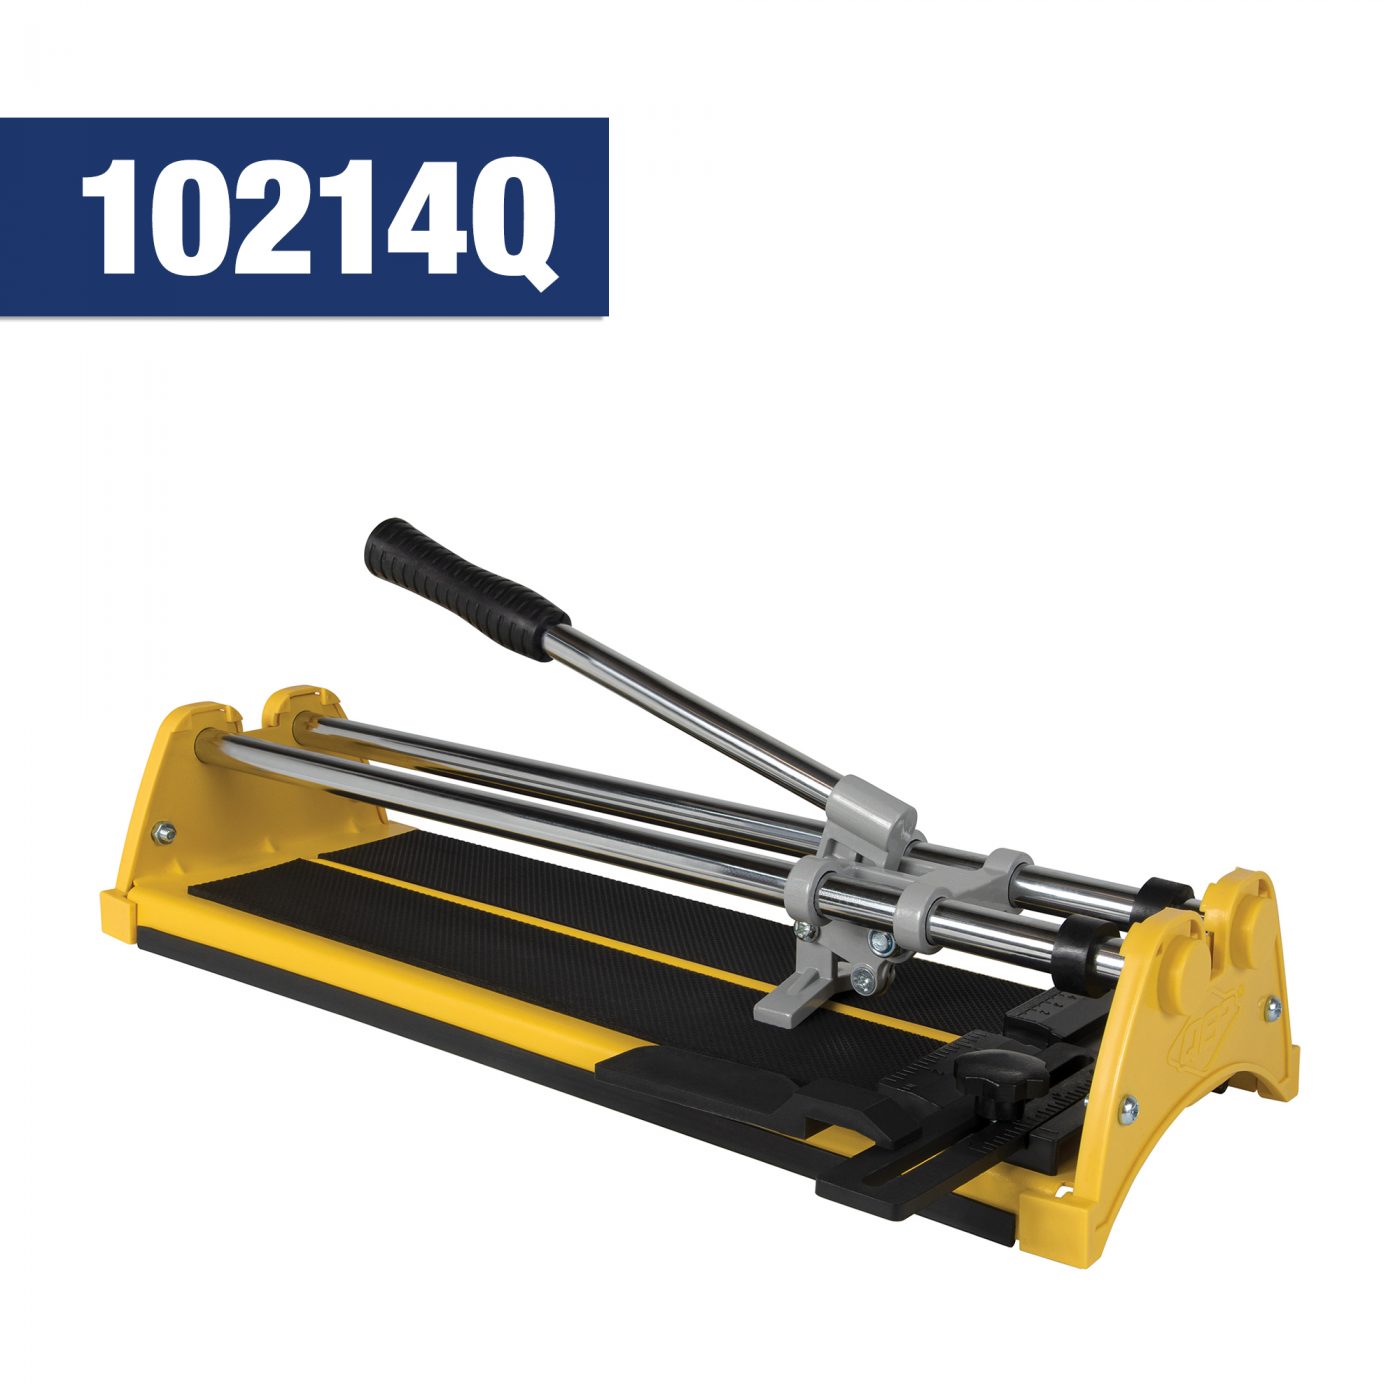 14" Professional Tile Cutter